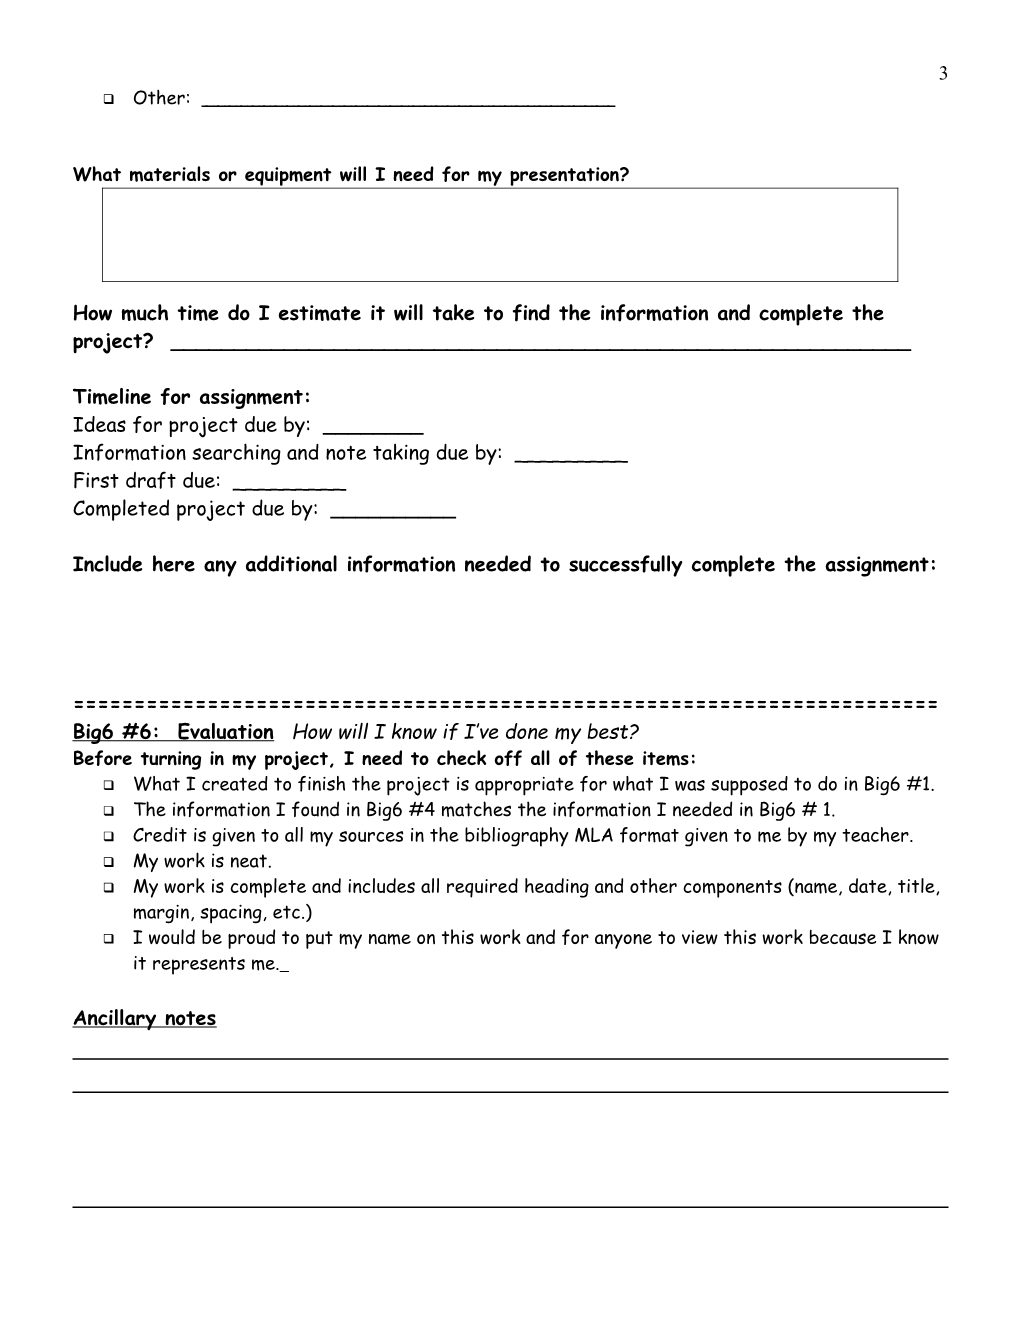 Research Assignment Organizer